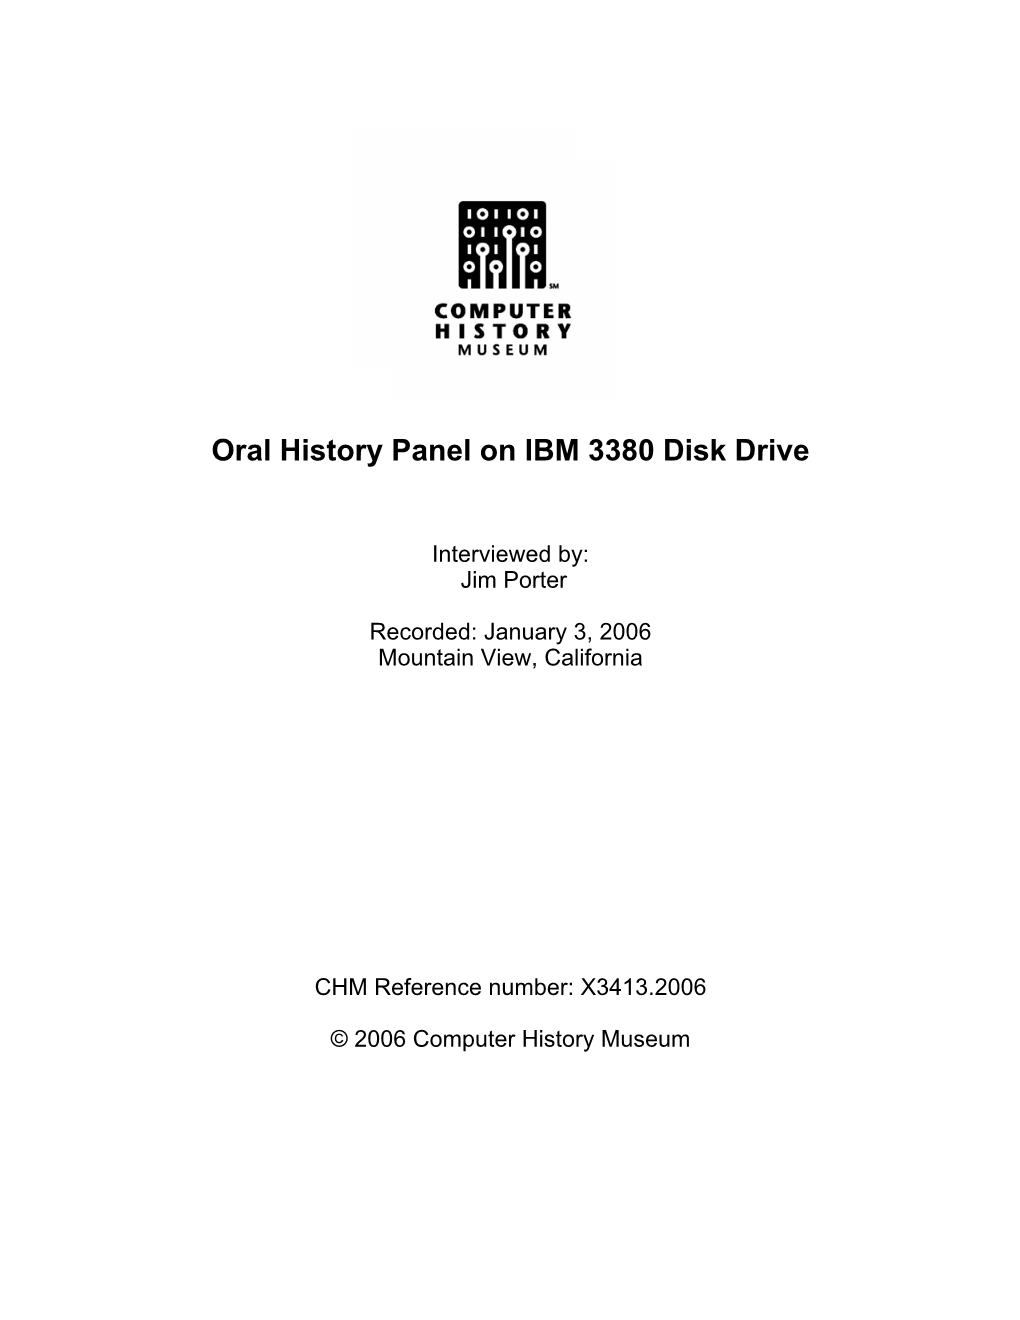 Oral History Panel on IBM 3380 Disk Drive